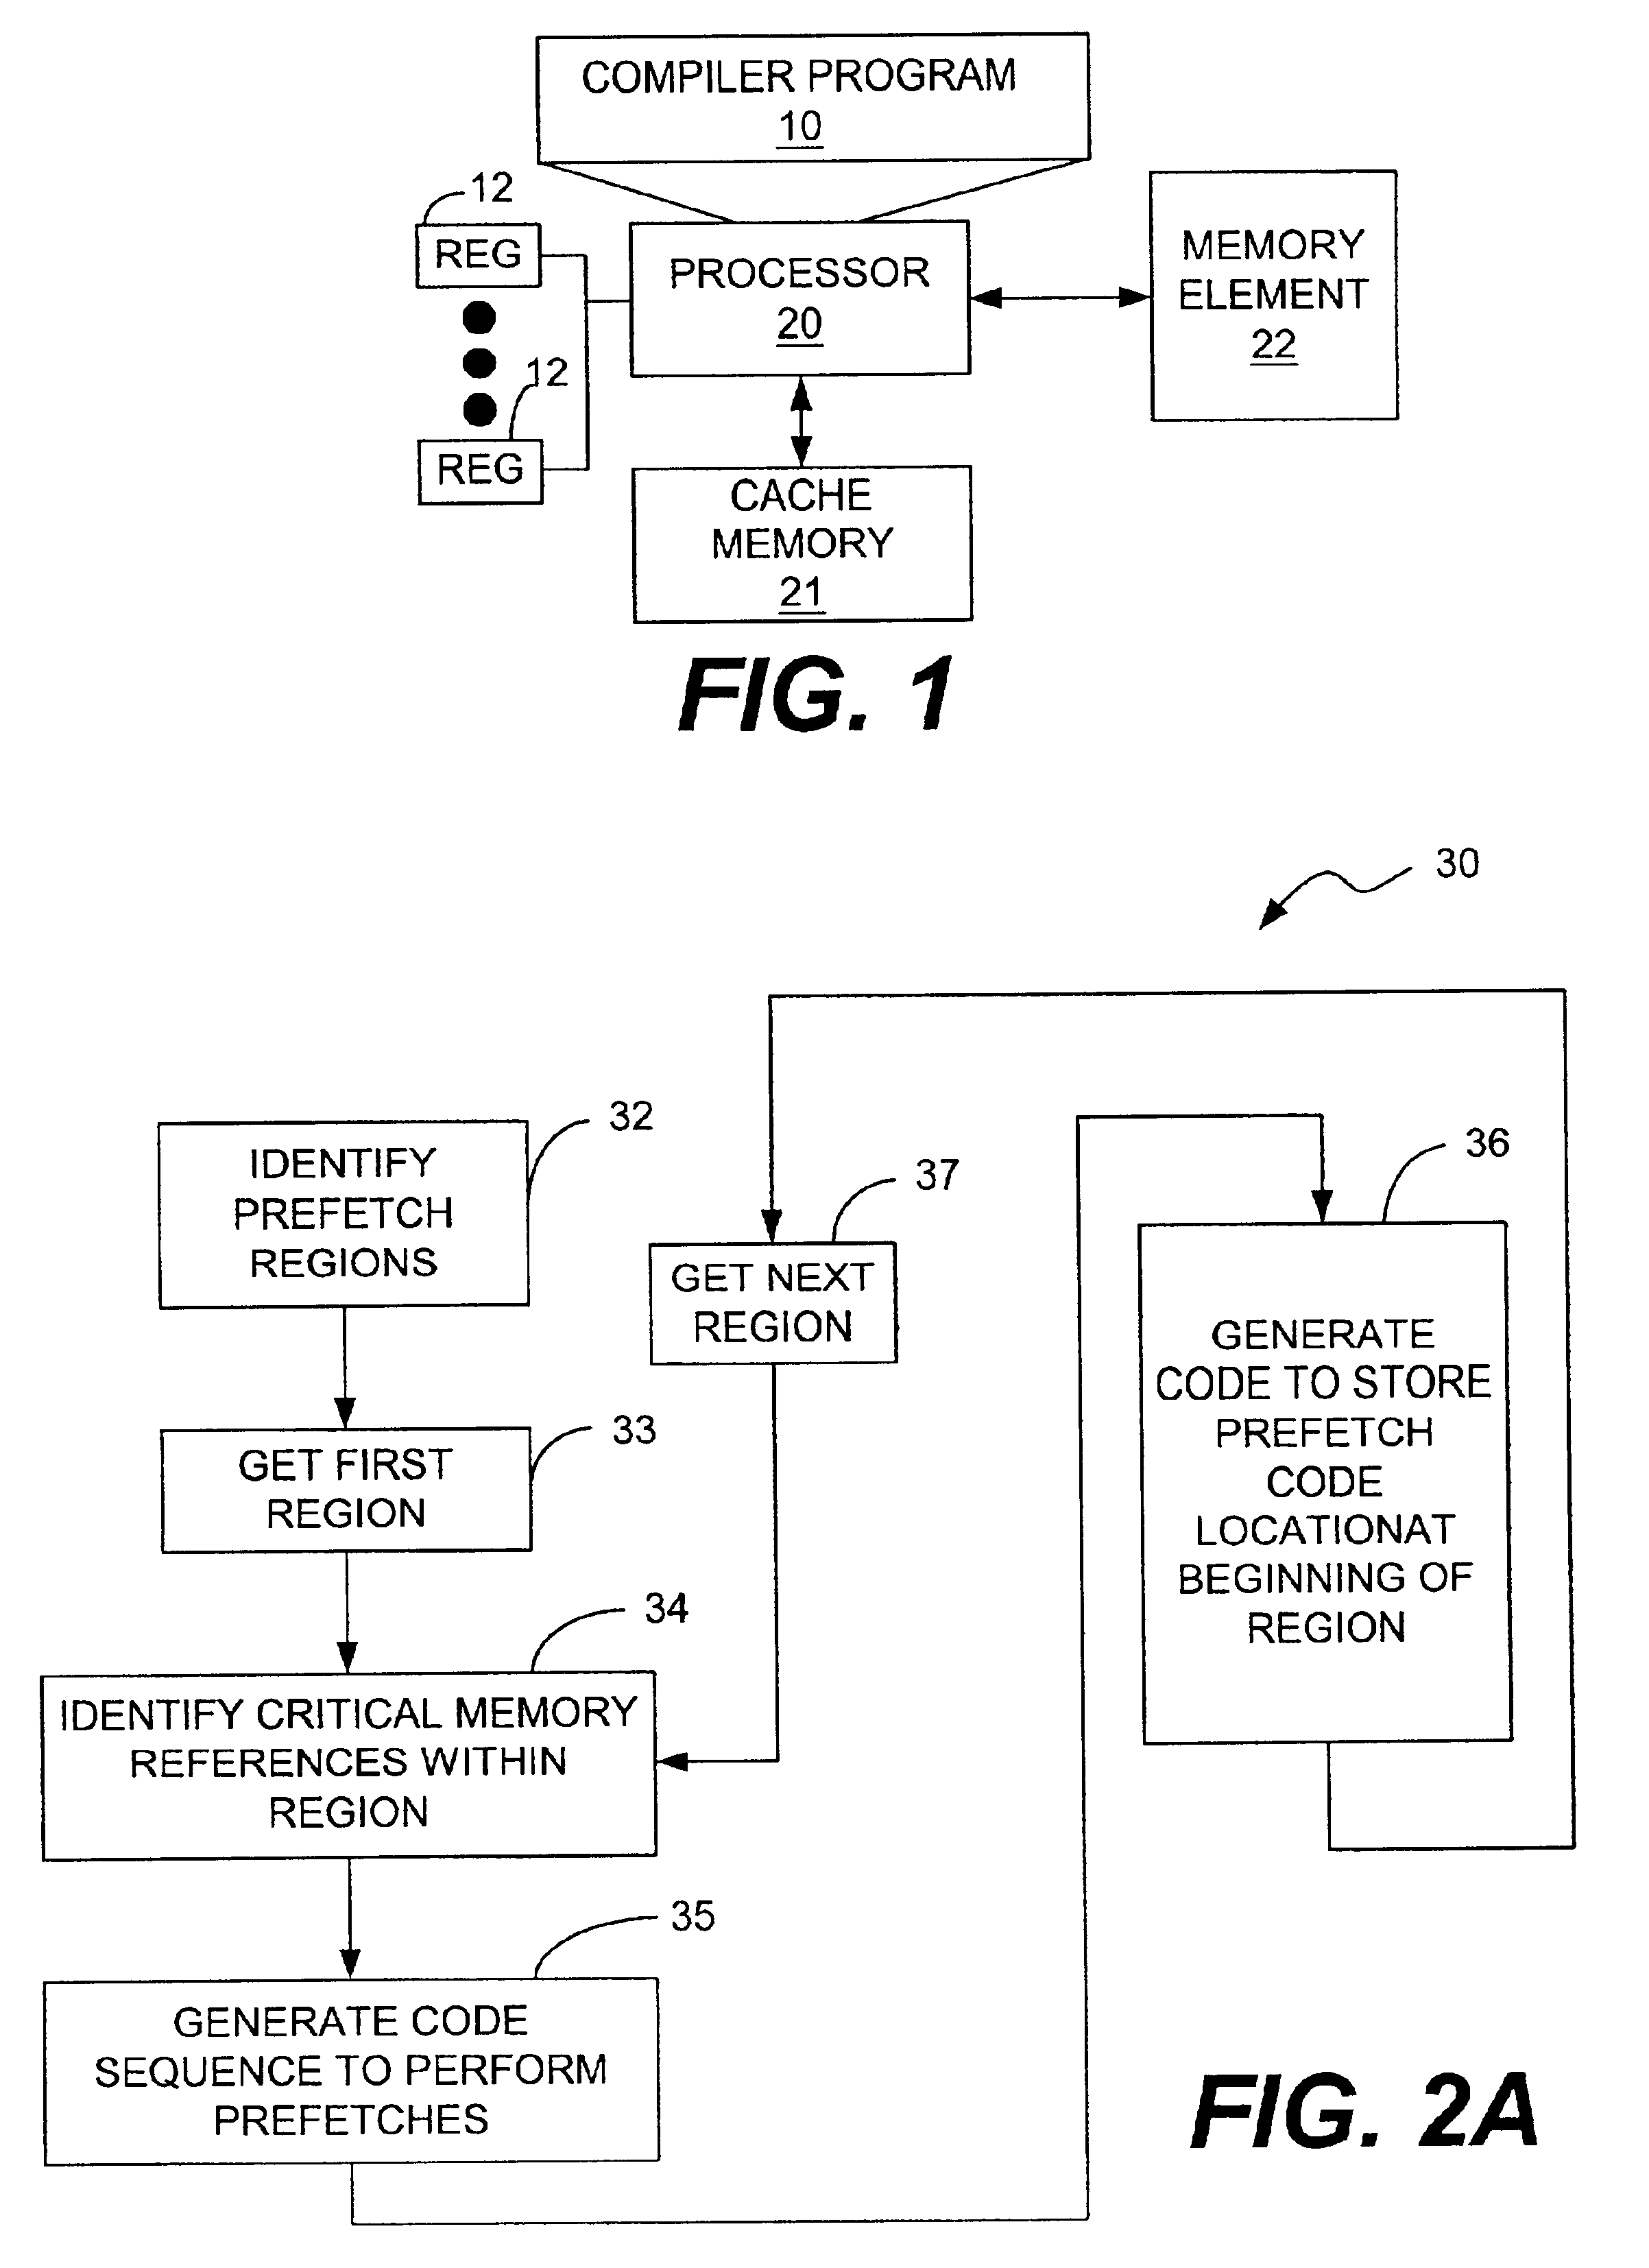 Method and apparatus for enabling a compiler to reduce cache misses by performing pre-fetches in the event of context switch